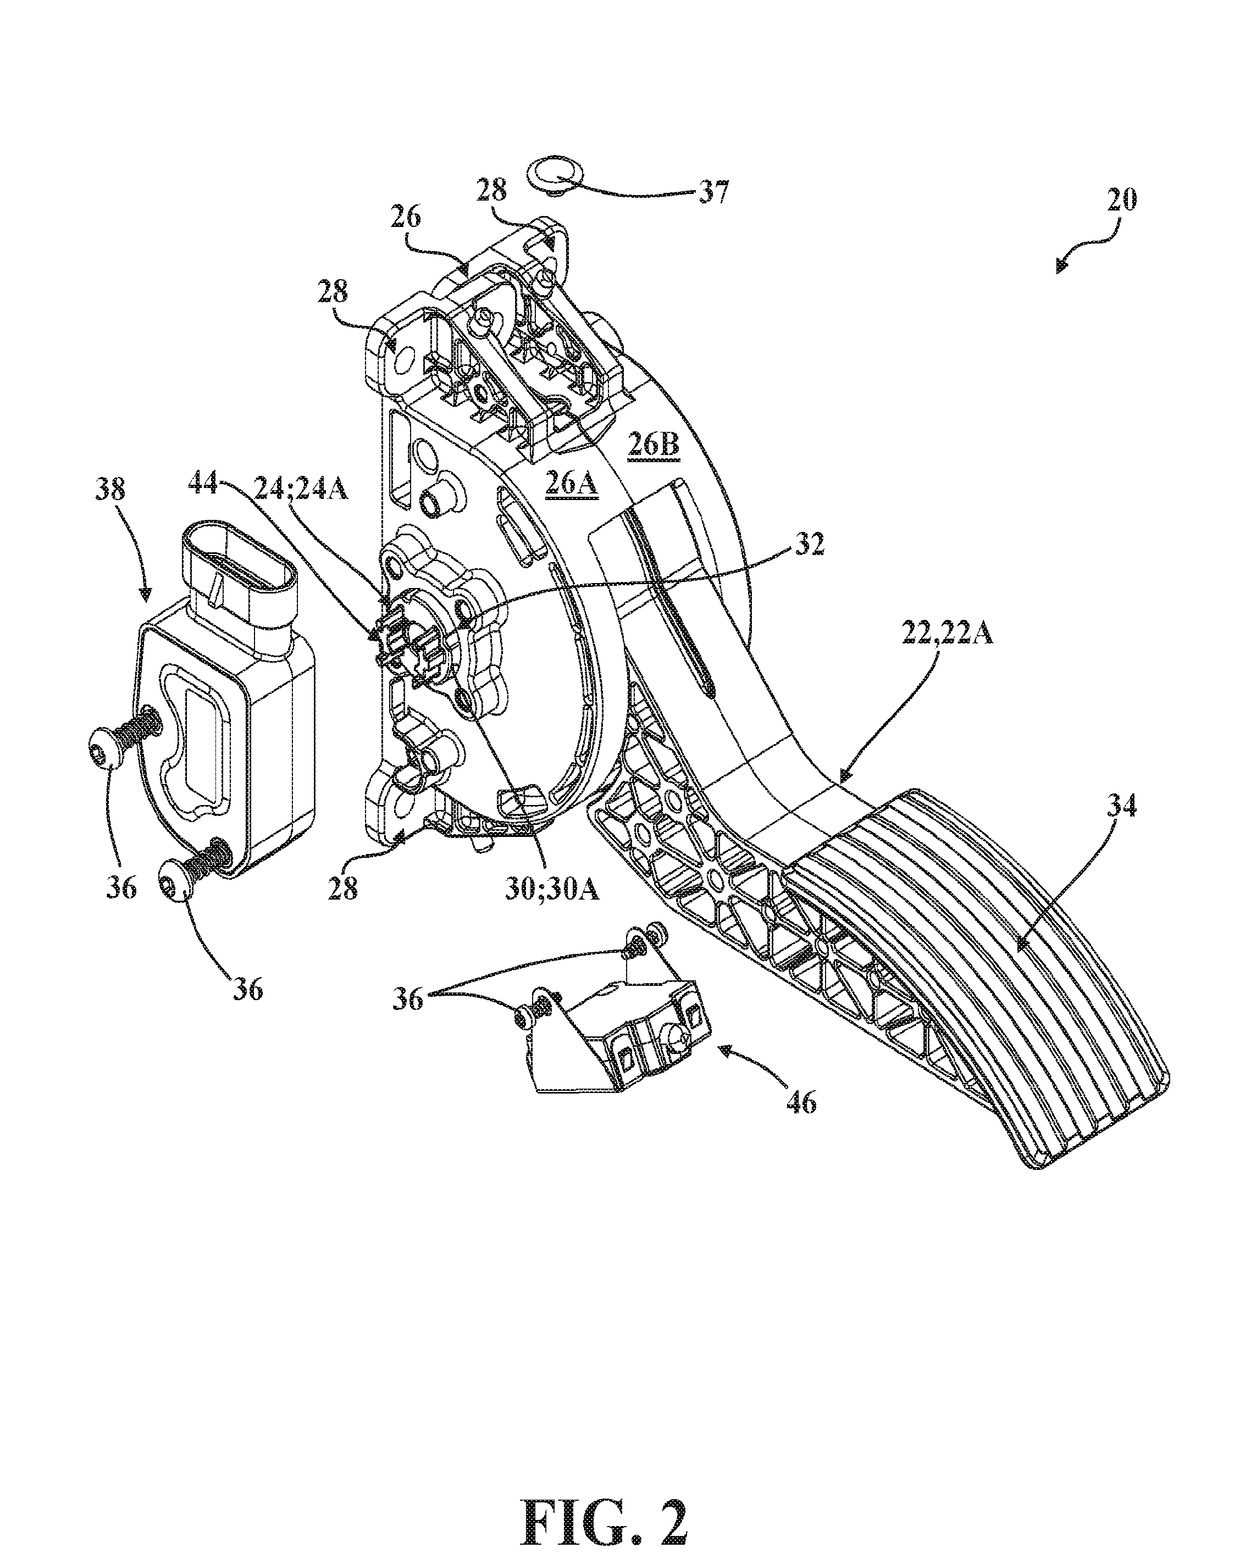 Pedal Assembly With Debris Filtering Mechanism